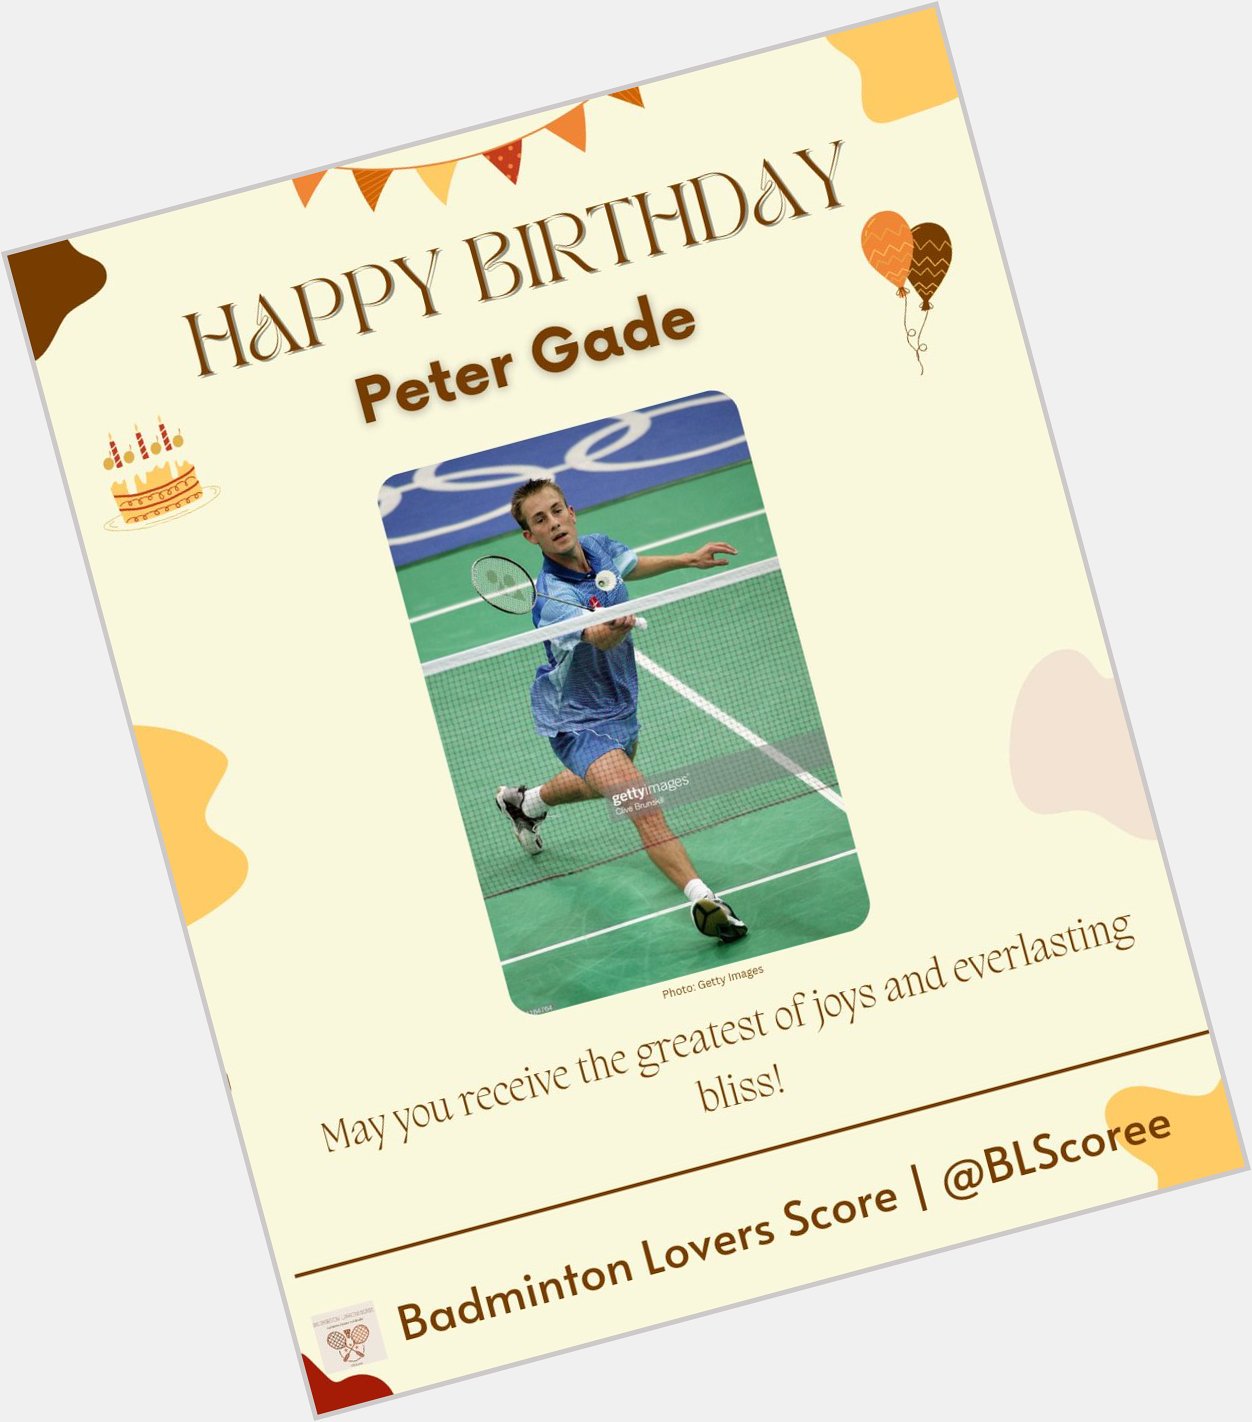 Happy Birthday, Peter Gade!  May you receive the greatest of joys and everlasting bliss!  